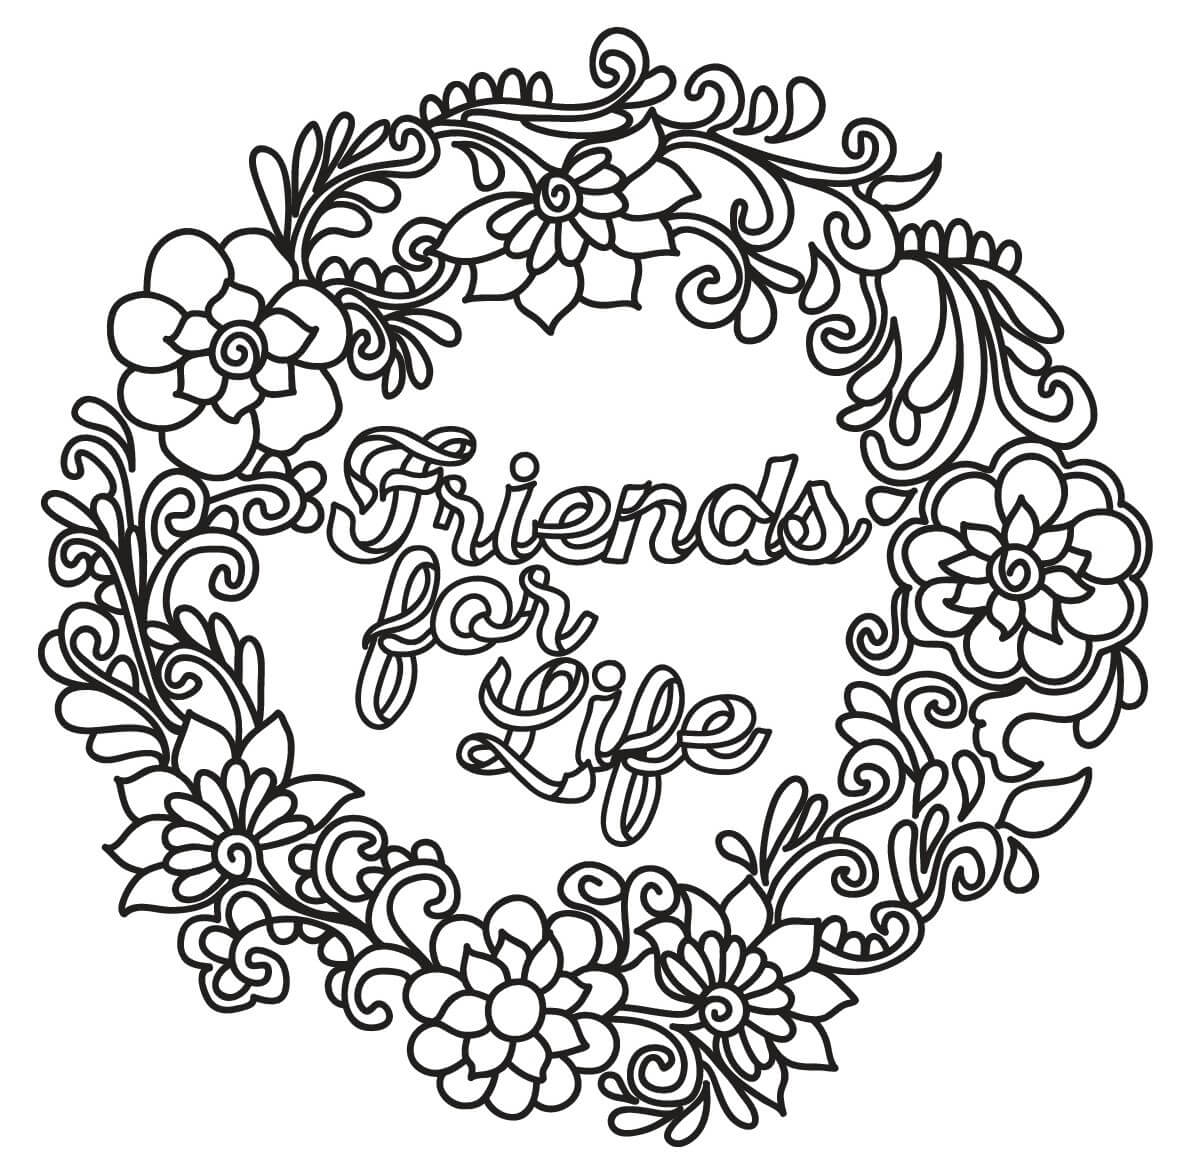 Friends for Life Coloring Page